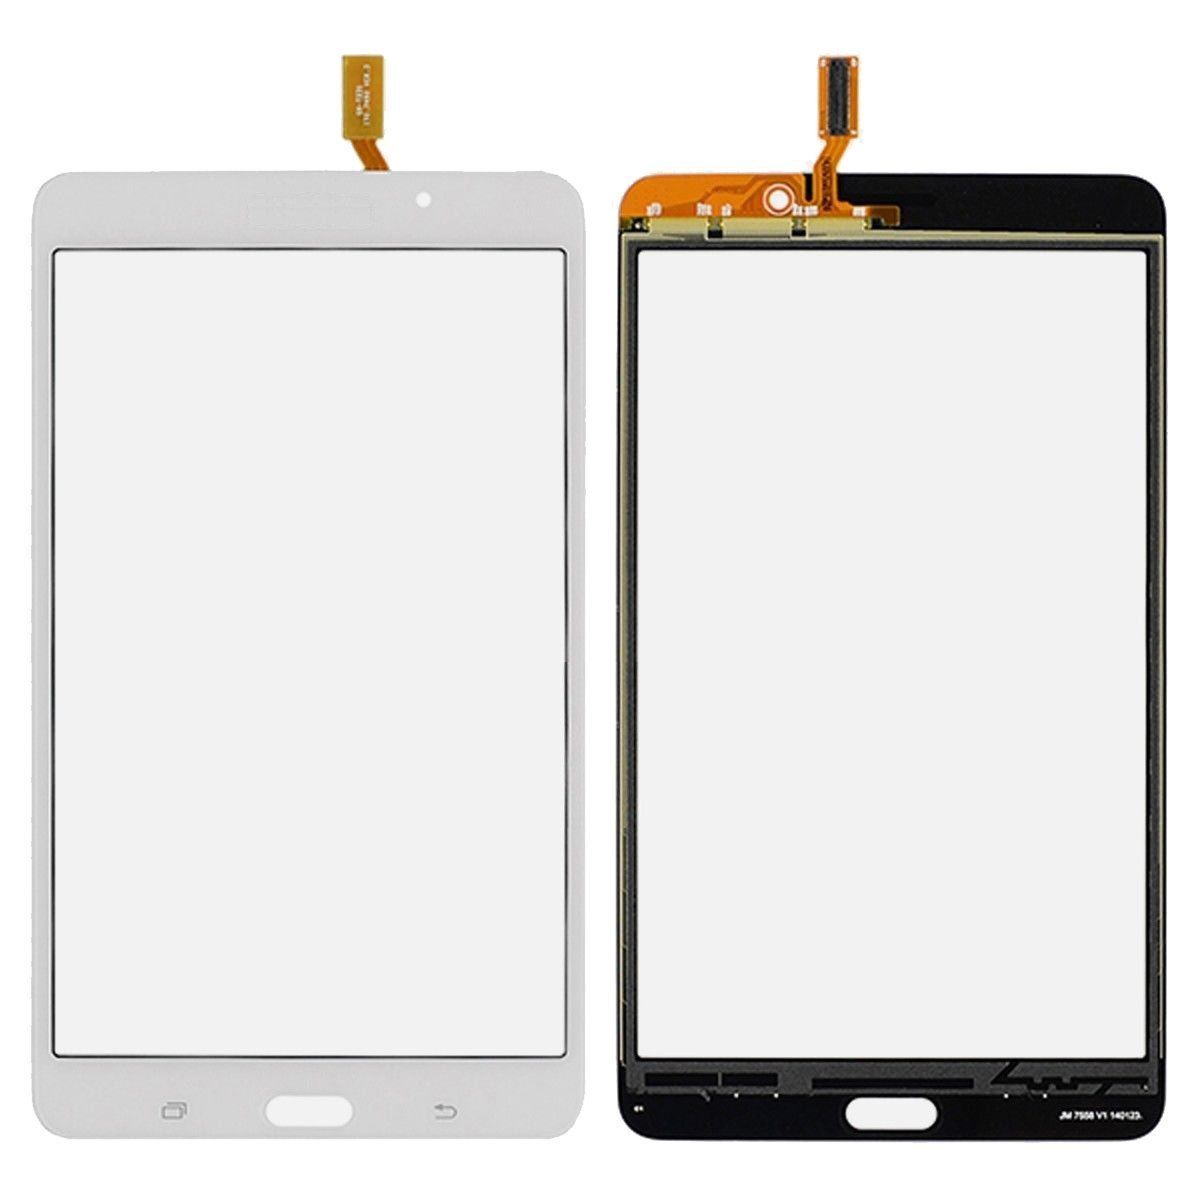 Touch Screen Digitizer Replace FOR Black Samsung Galaxy Tab 4 7.0 T230 SM-T230NU 